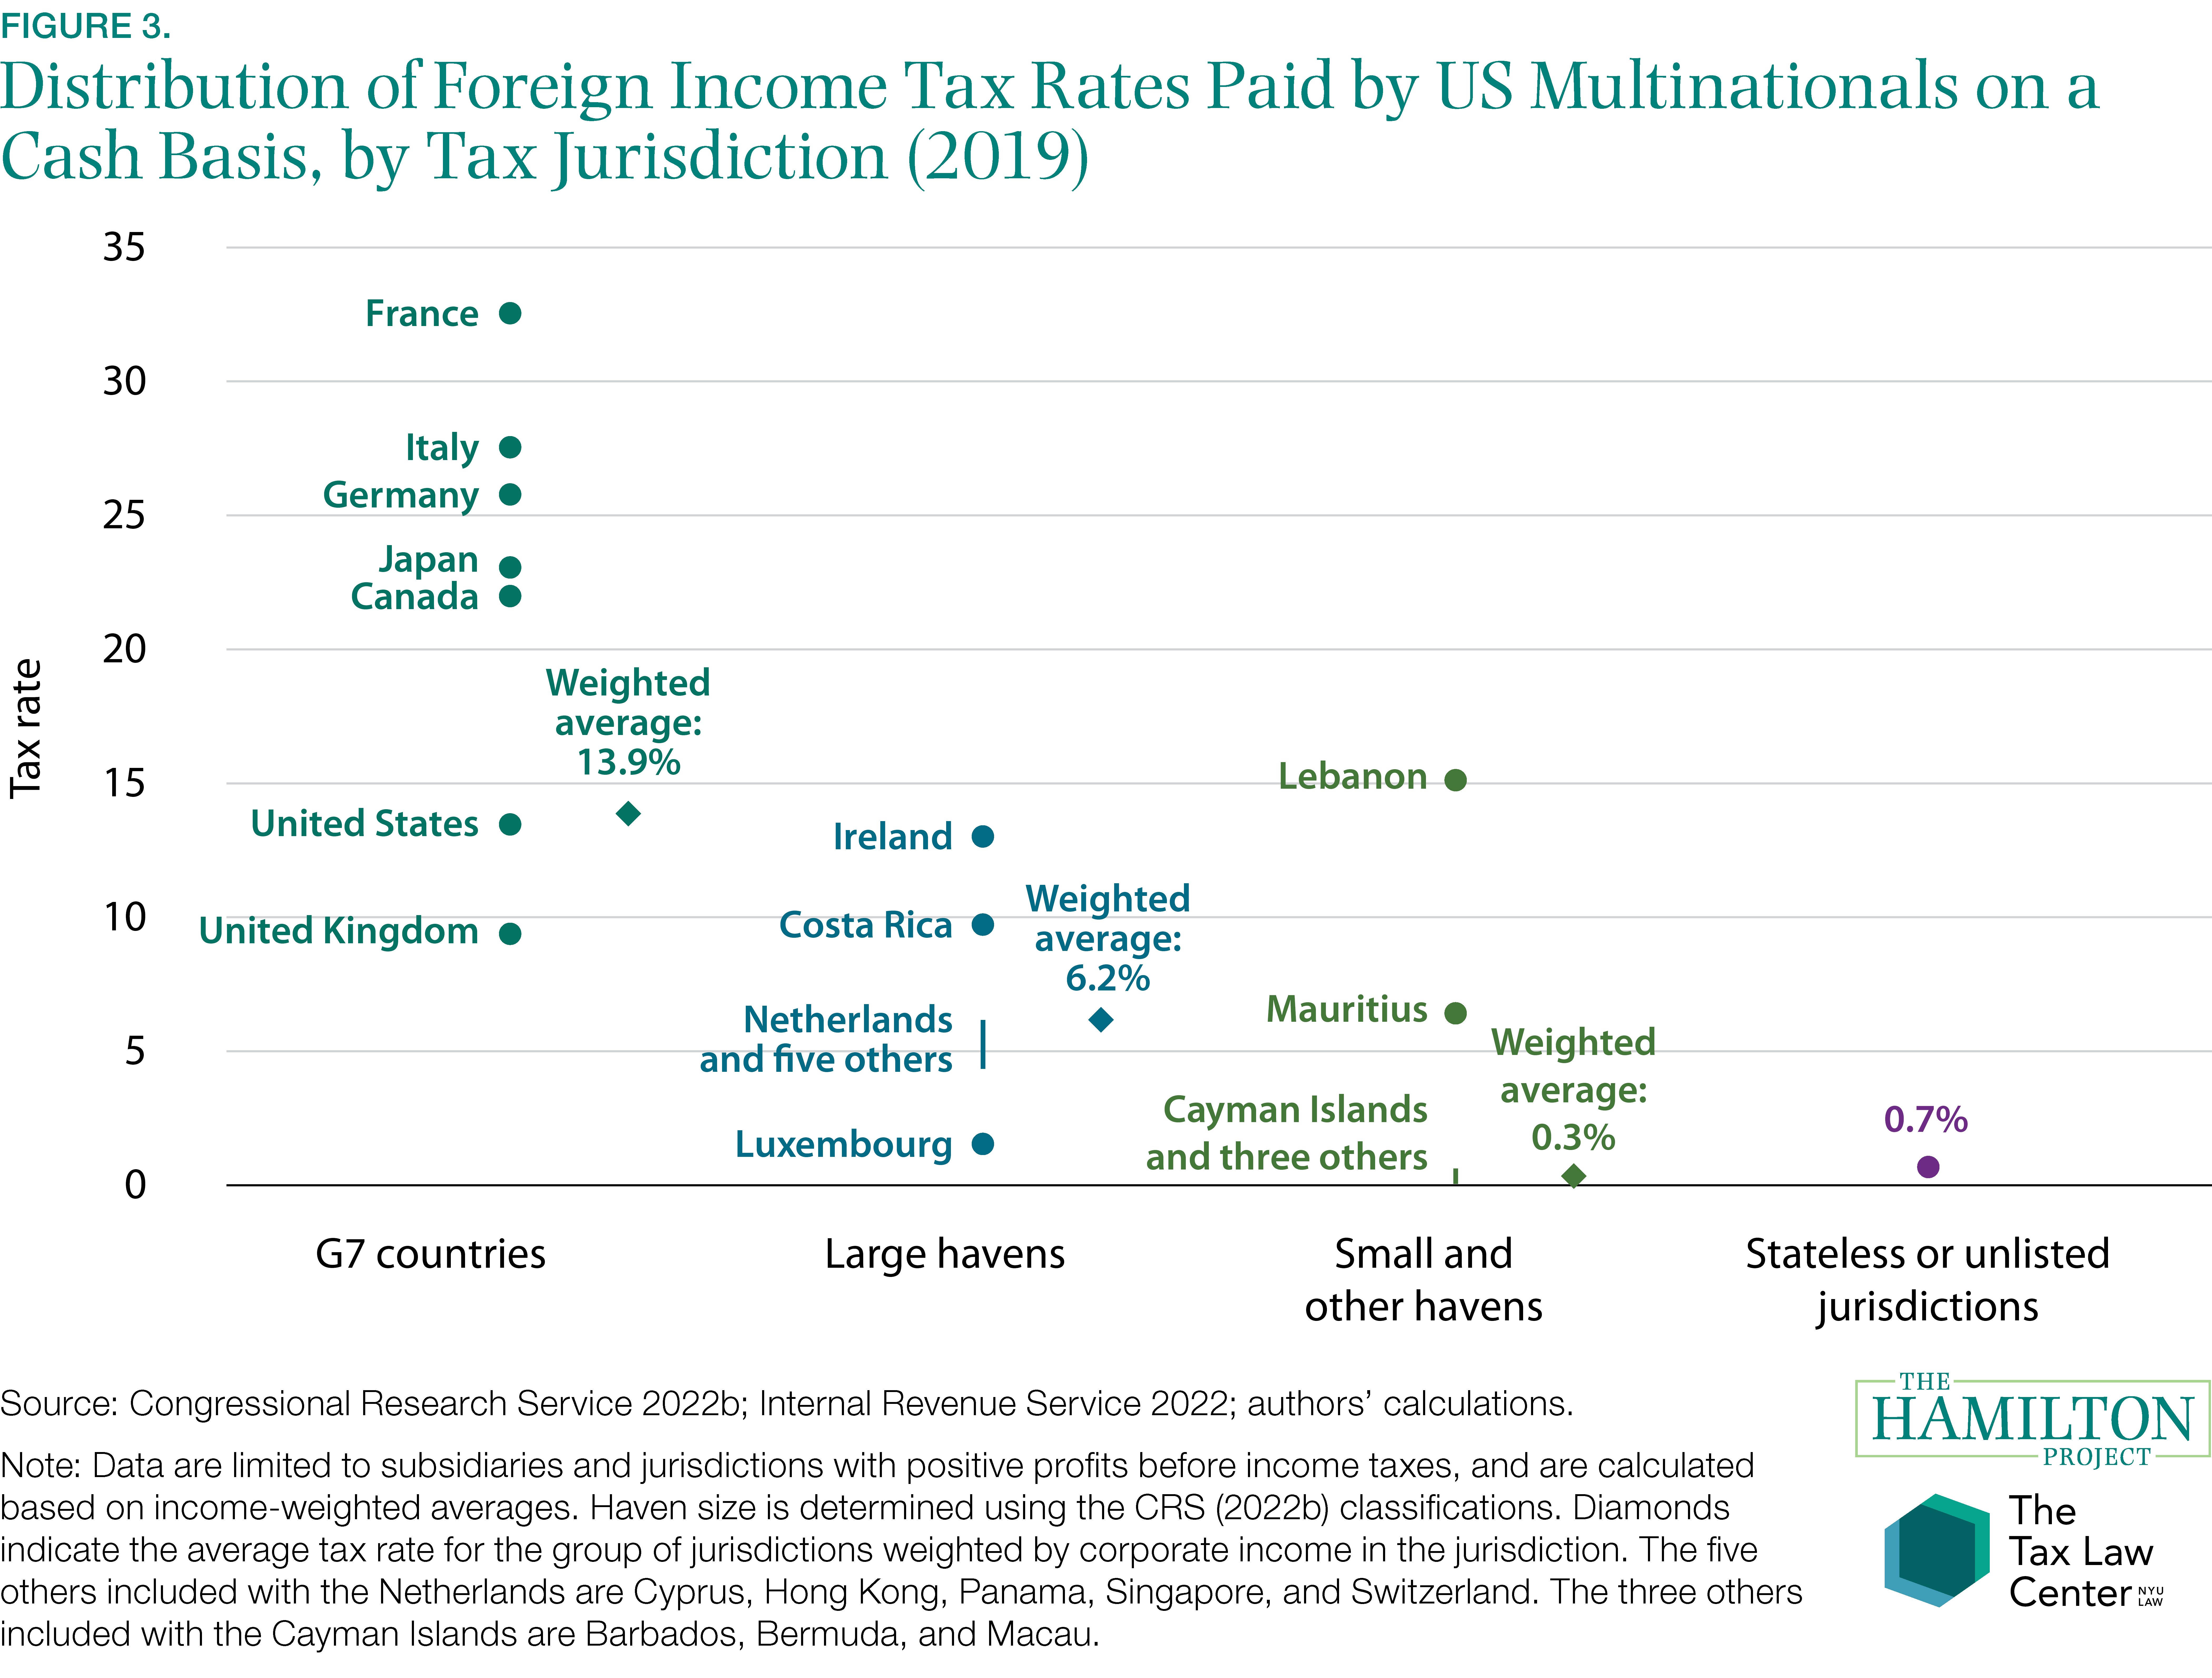 Figure 3. Distribution of Foreign Income Tax Rates Paid by US Multinationals on a Cash Basis, by Tax Jurisdiction (2019)